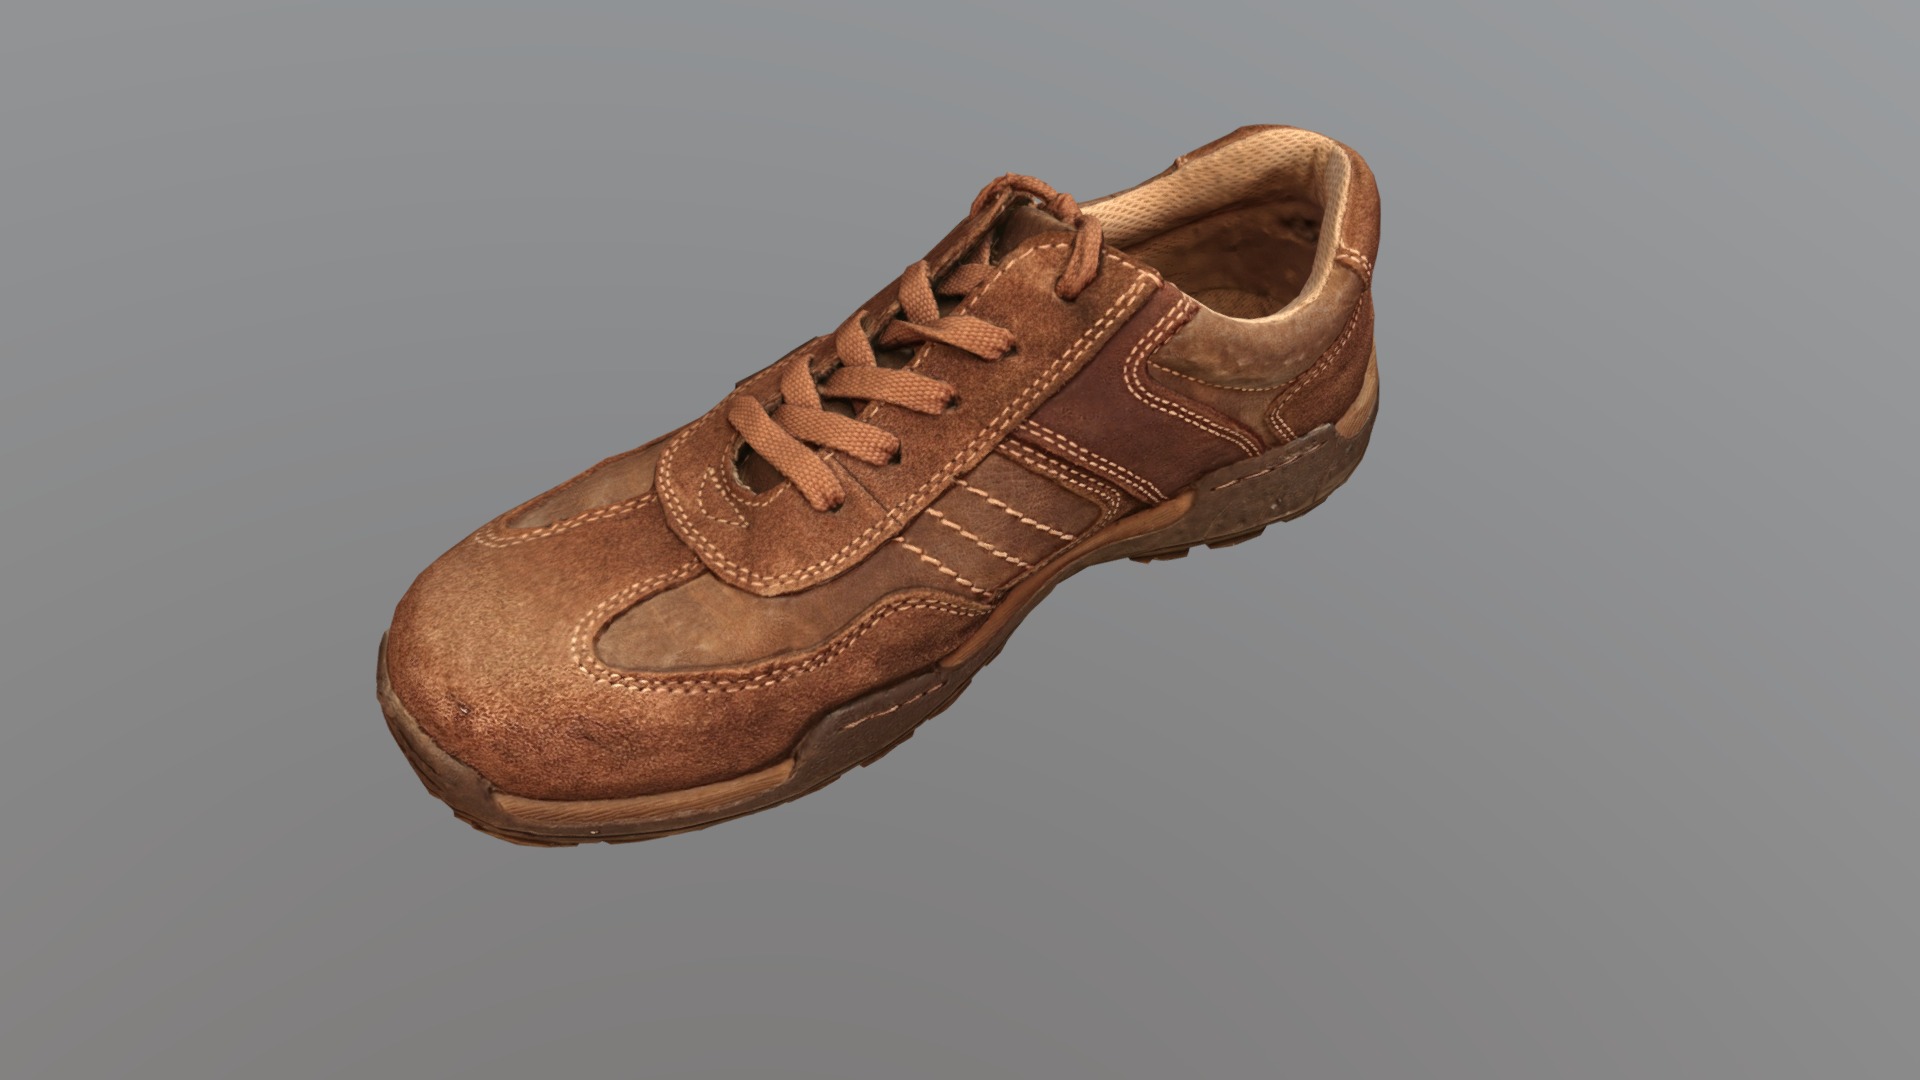 3D model Shoe Brown - This is a 3D model of the Shoe Brown. The 3D model is about a brown leather shoe.